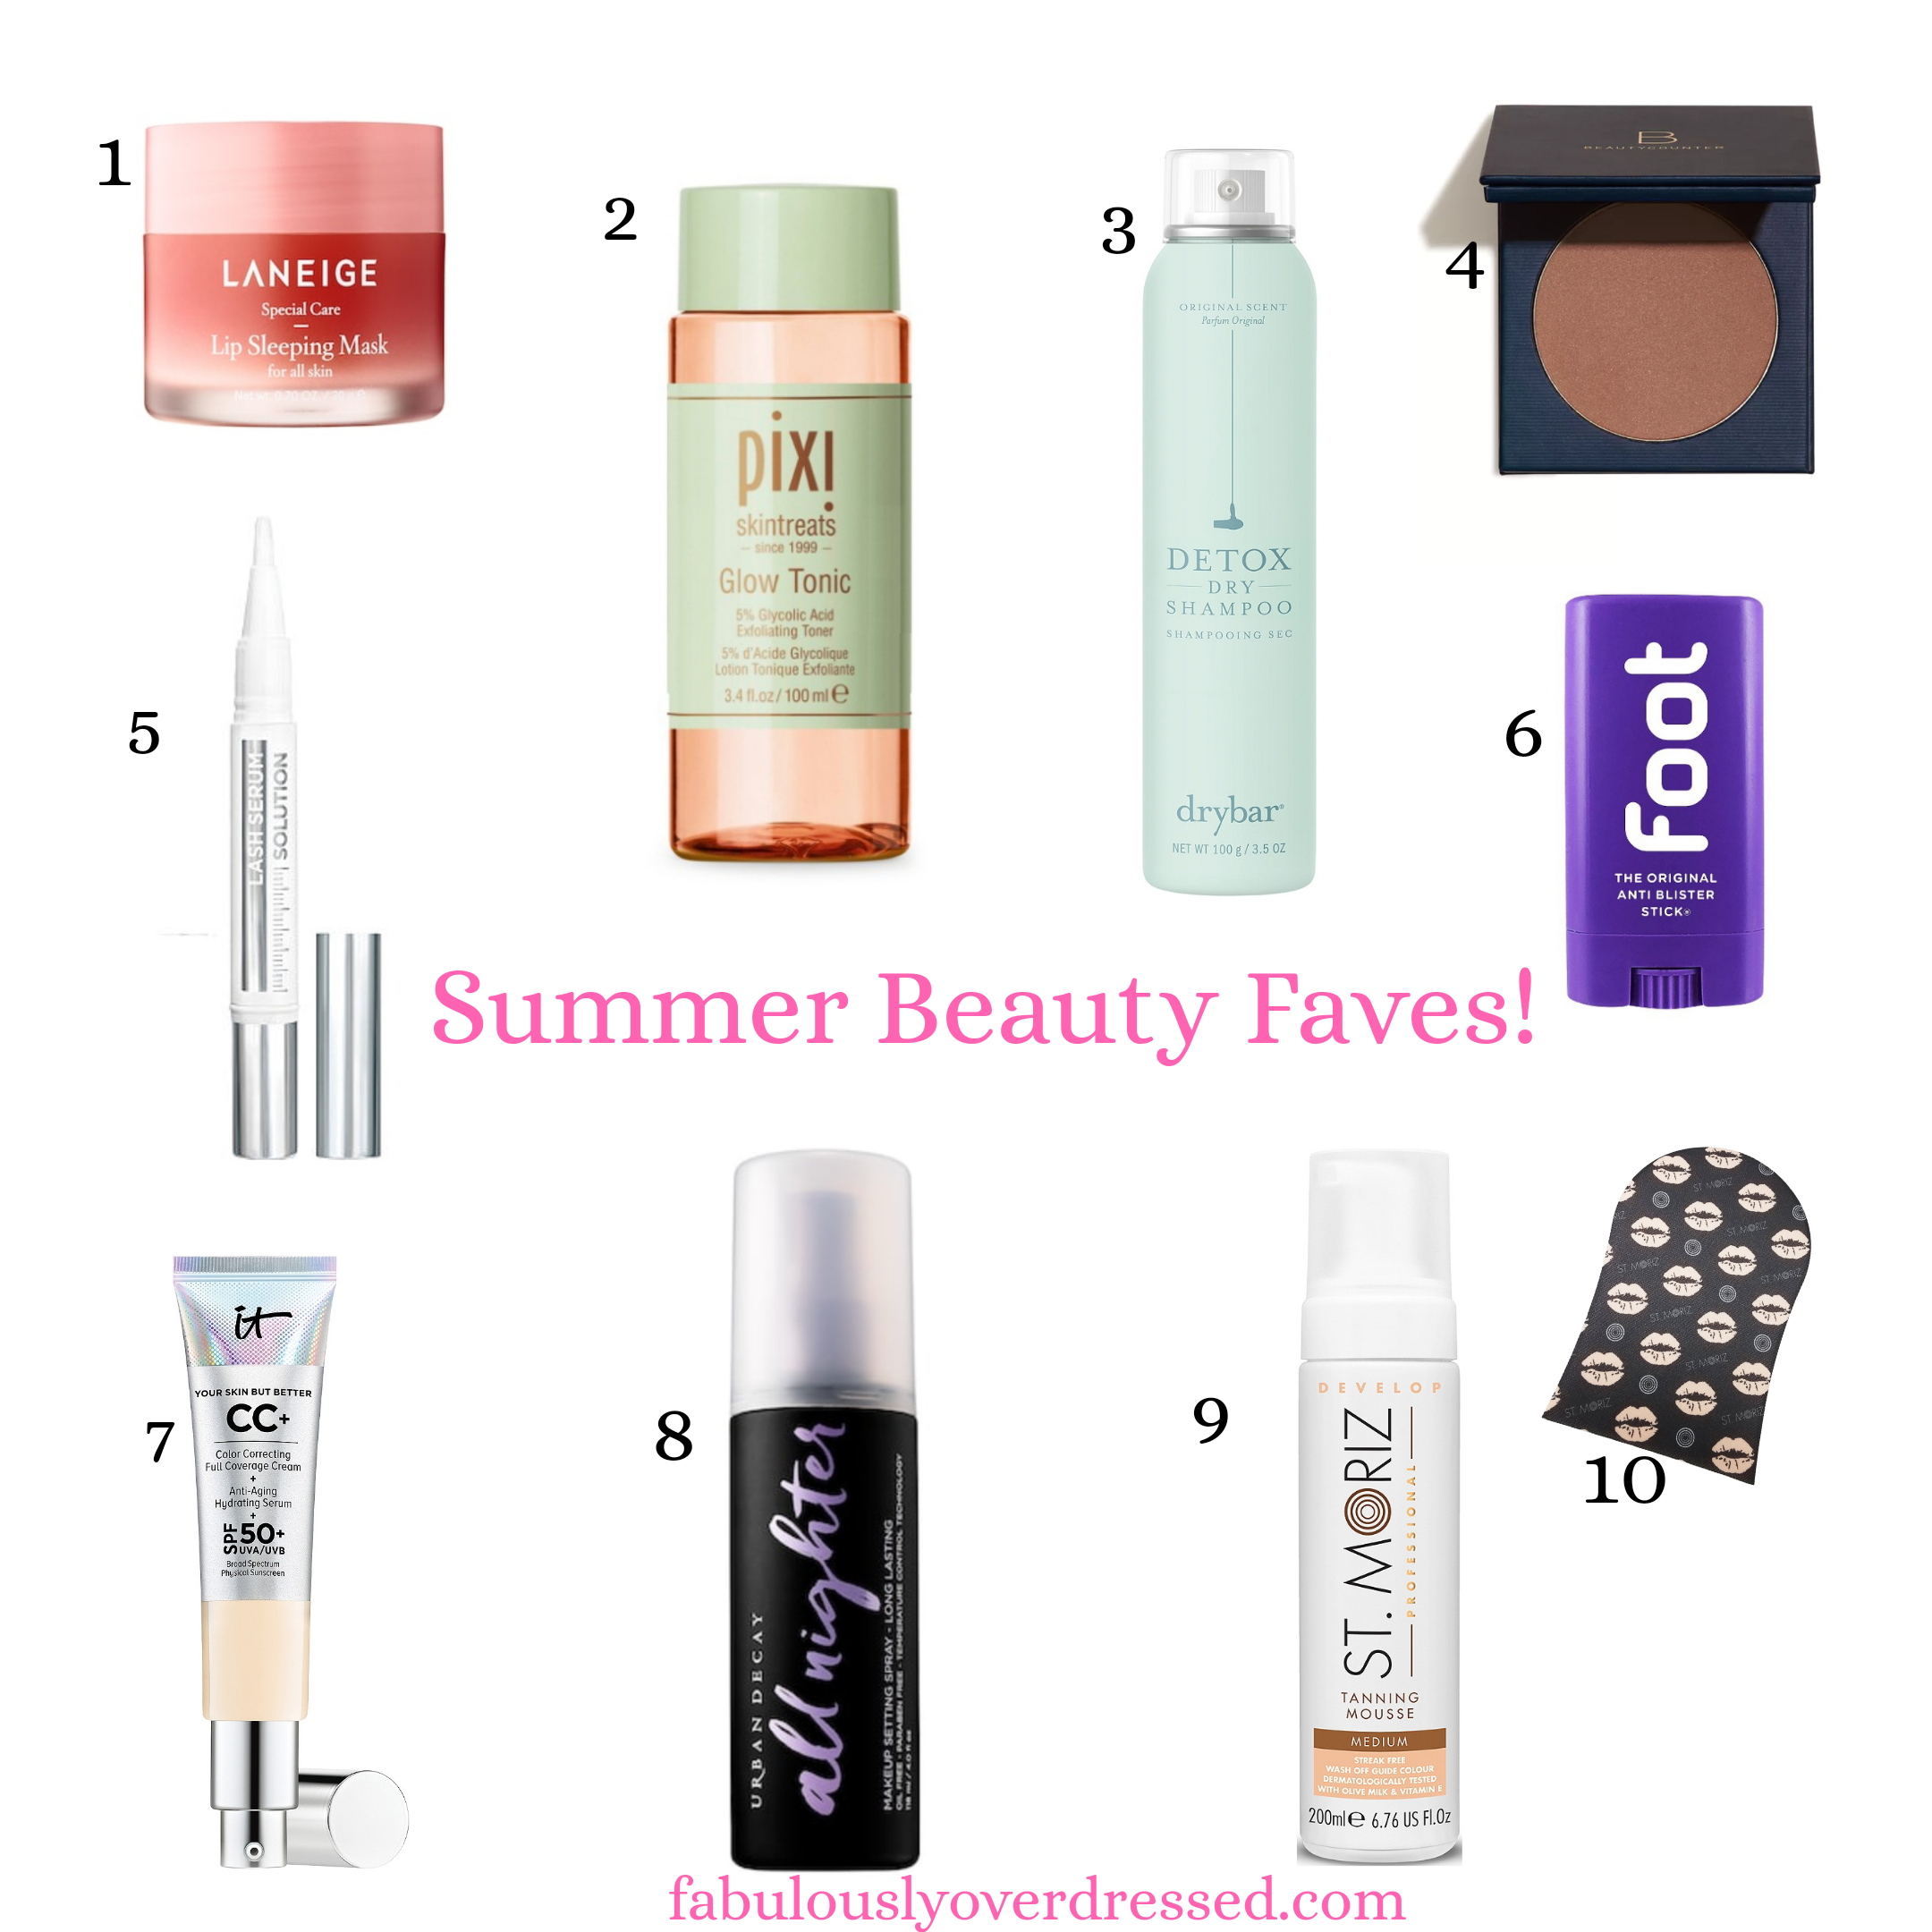 Summer-beauty-faves-fabulouslyoverdressed